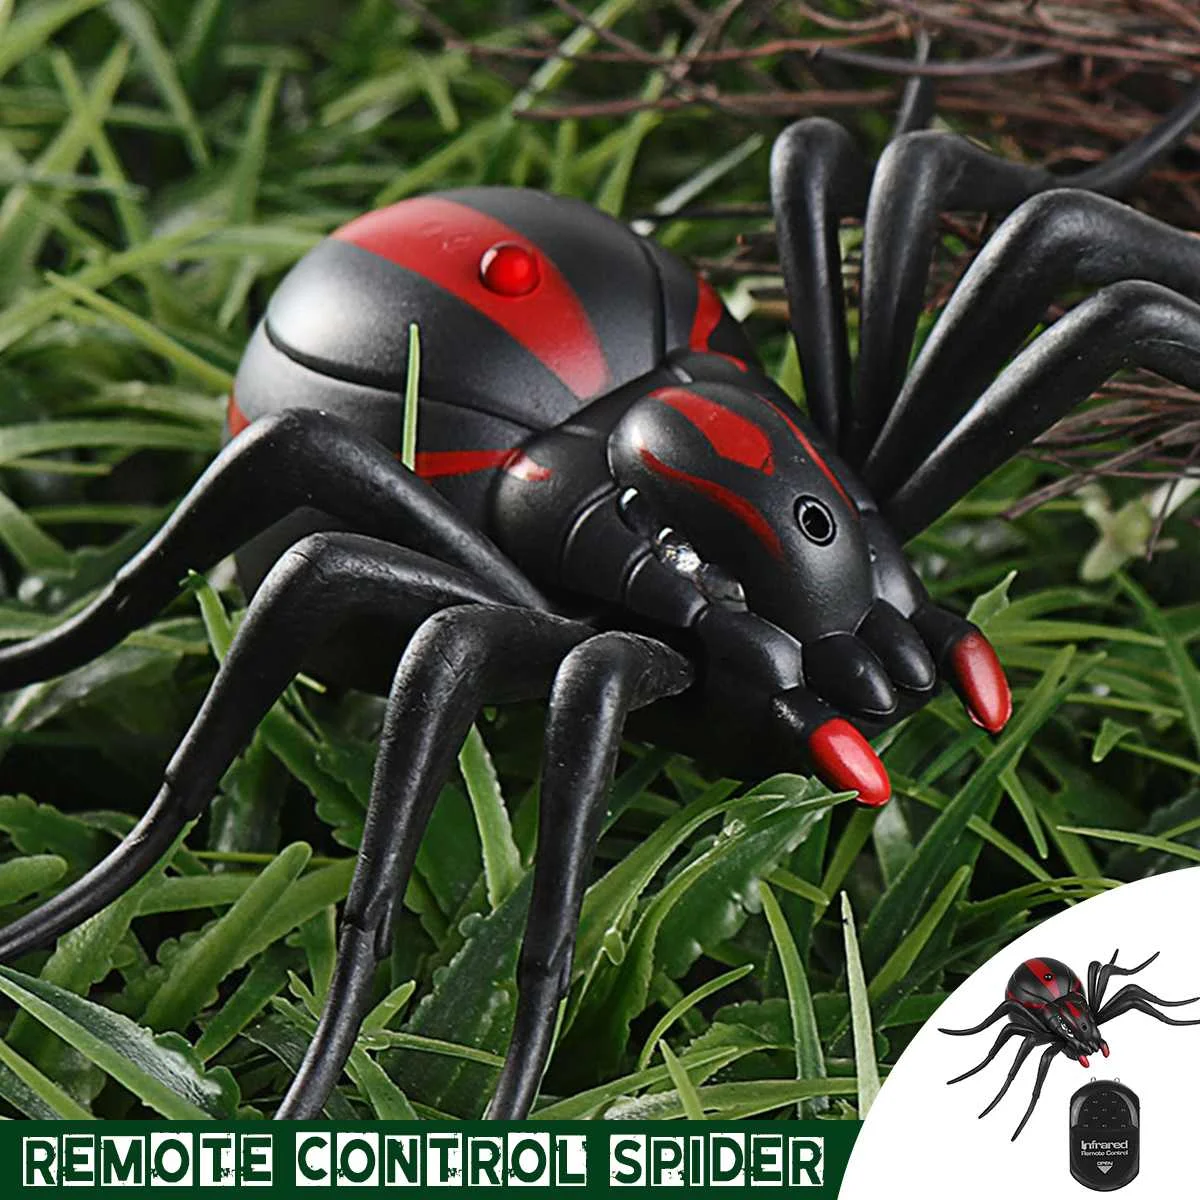 

NEW Infrared Remote Control Spider Animal Toy Prank Insects Joke Scary Trick Toys Birthday Gifts